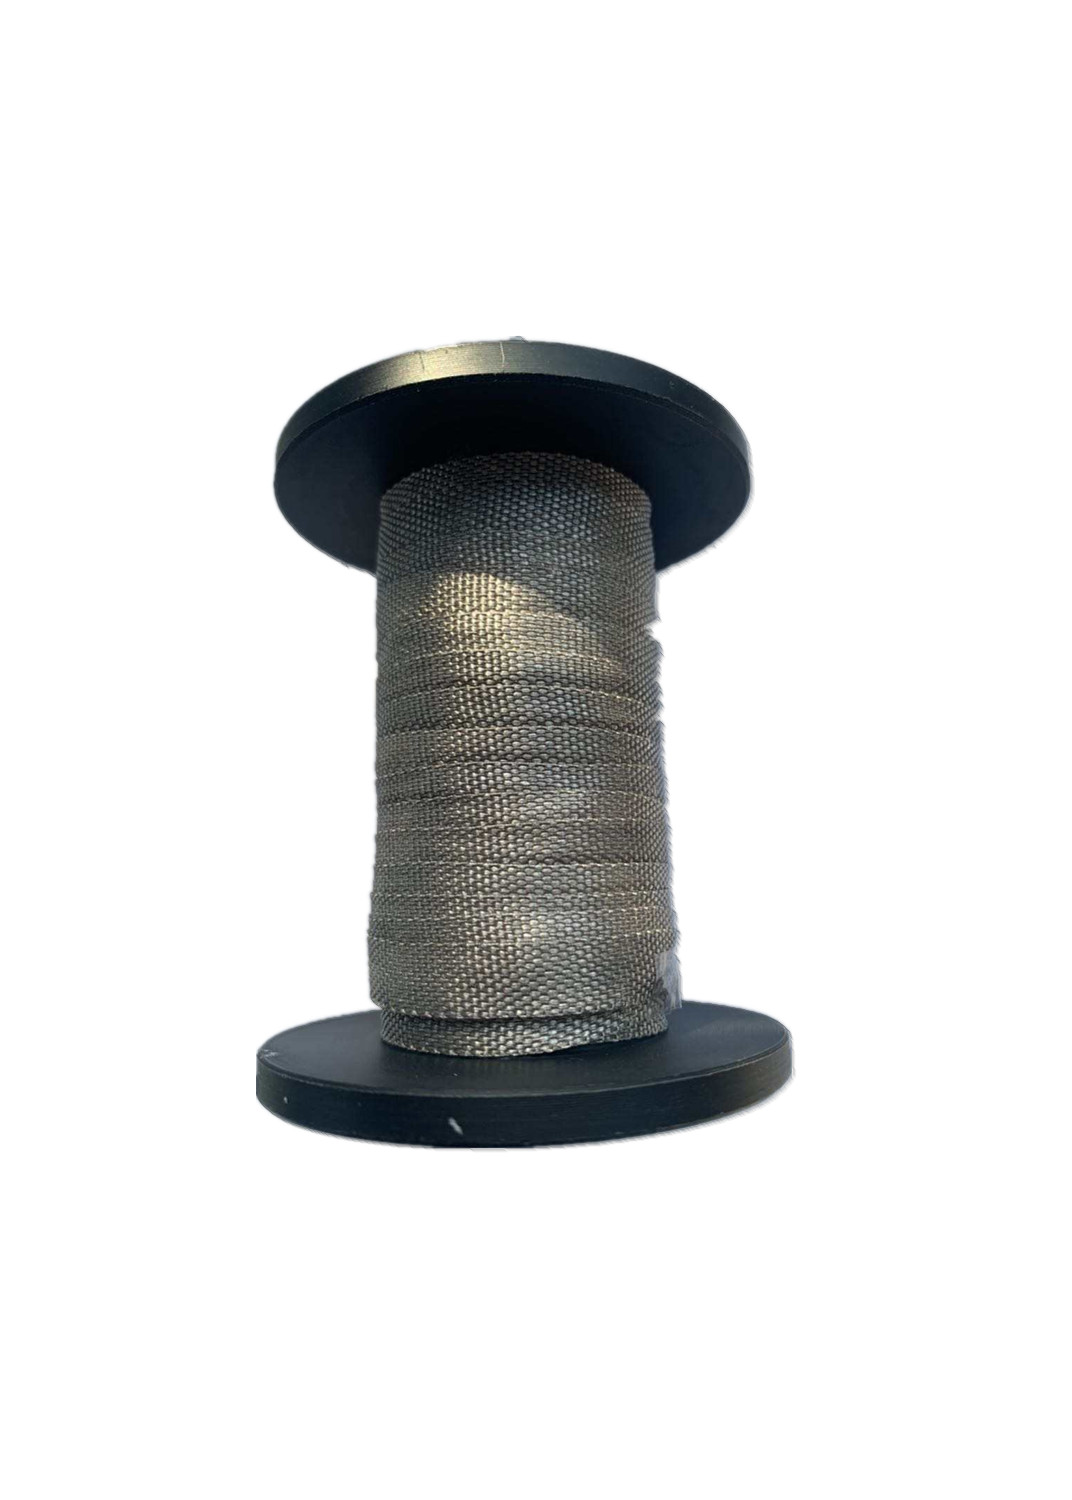 Silver plated conductive rope